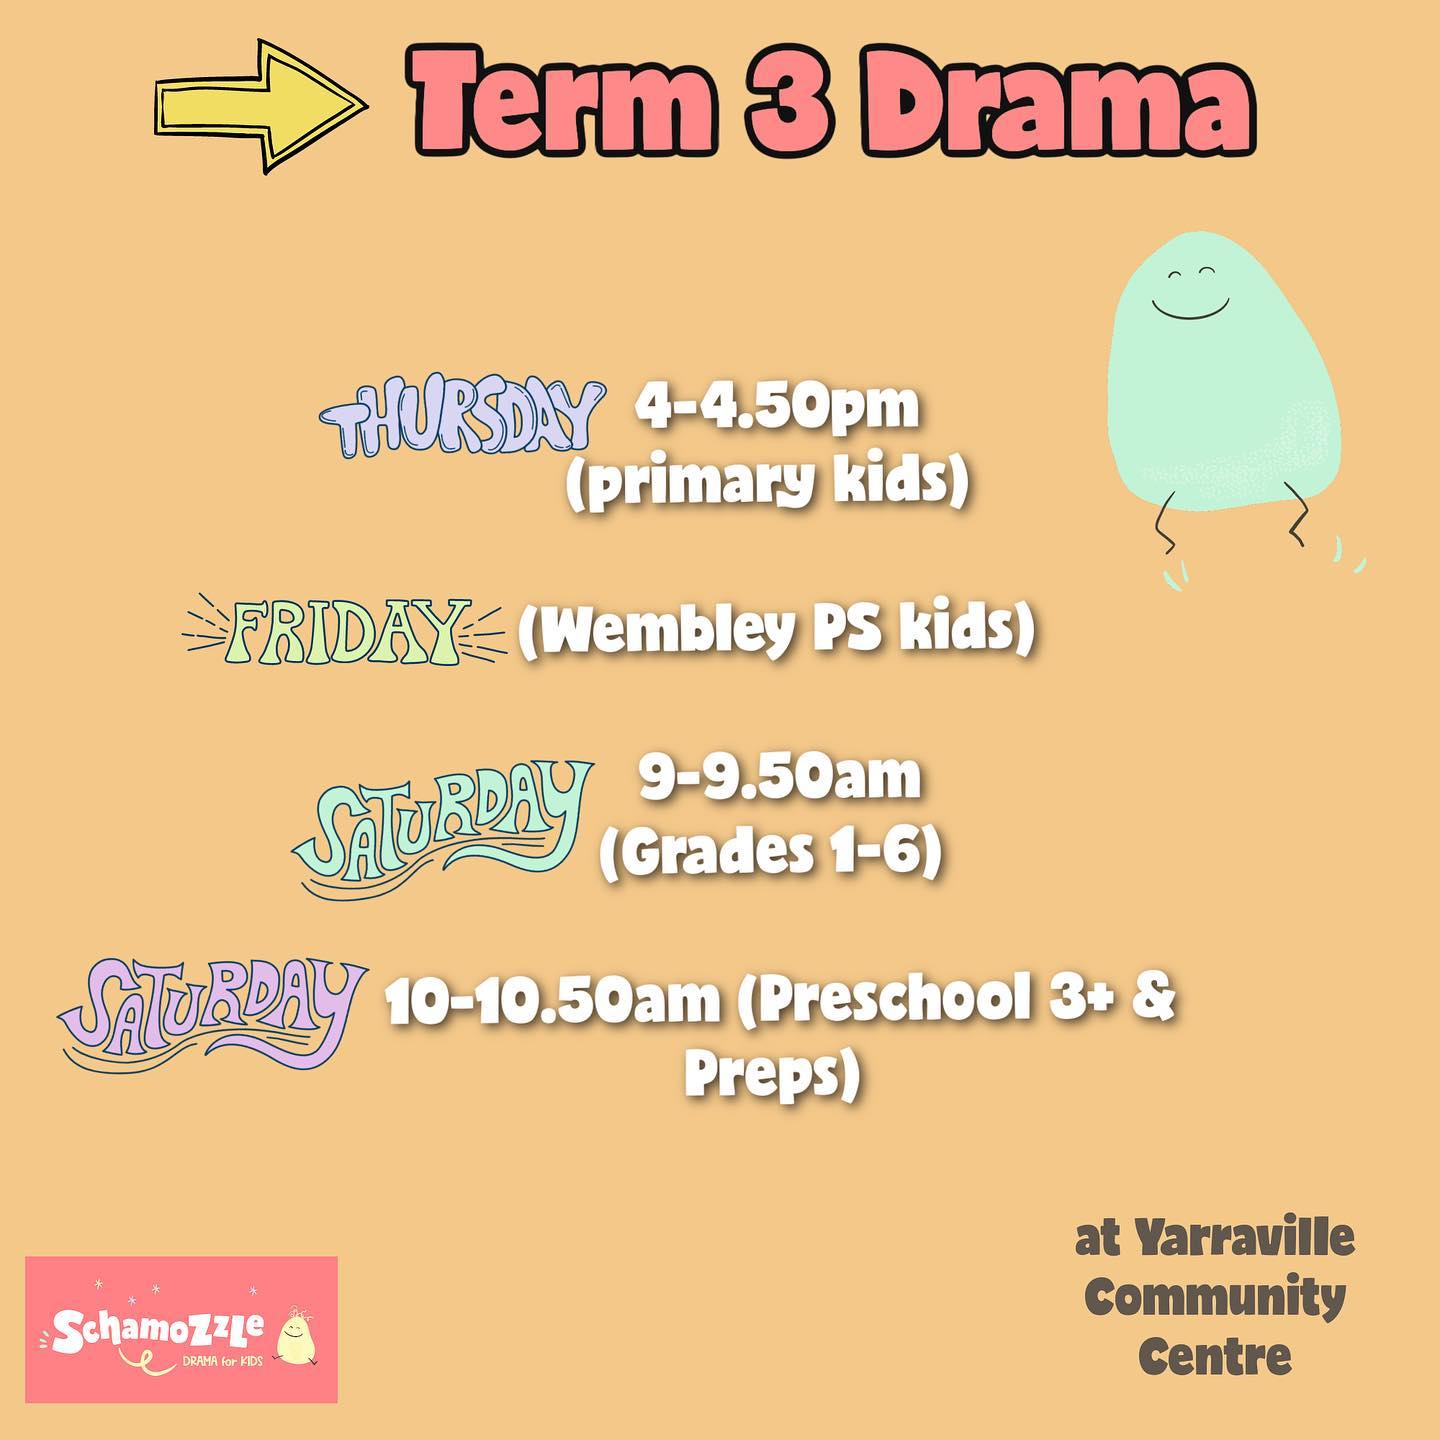 It’s not too late to enrol in our term 3 drama classes. We start up this week. Contact us for a free trial. 

#dramaforkids #yarraville #classesforkids #dramaclasses #melbournemums #innerwestmelb #innerwest #innerwestmums #seddon #footscray #wefo #kidscreating #confidence #creative